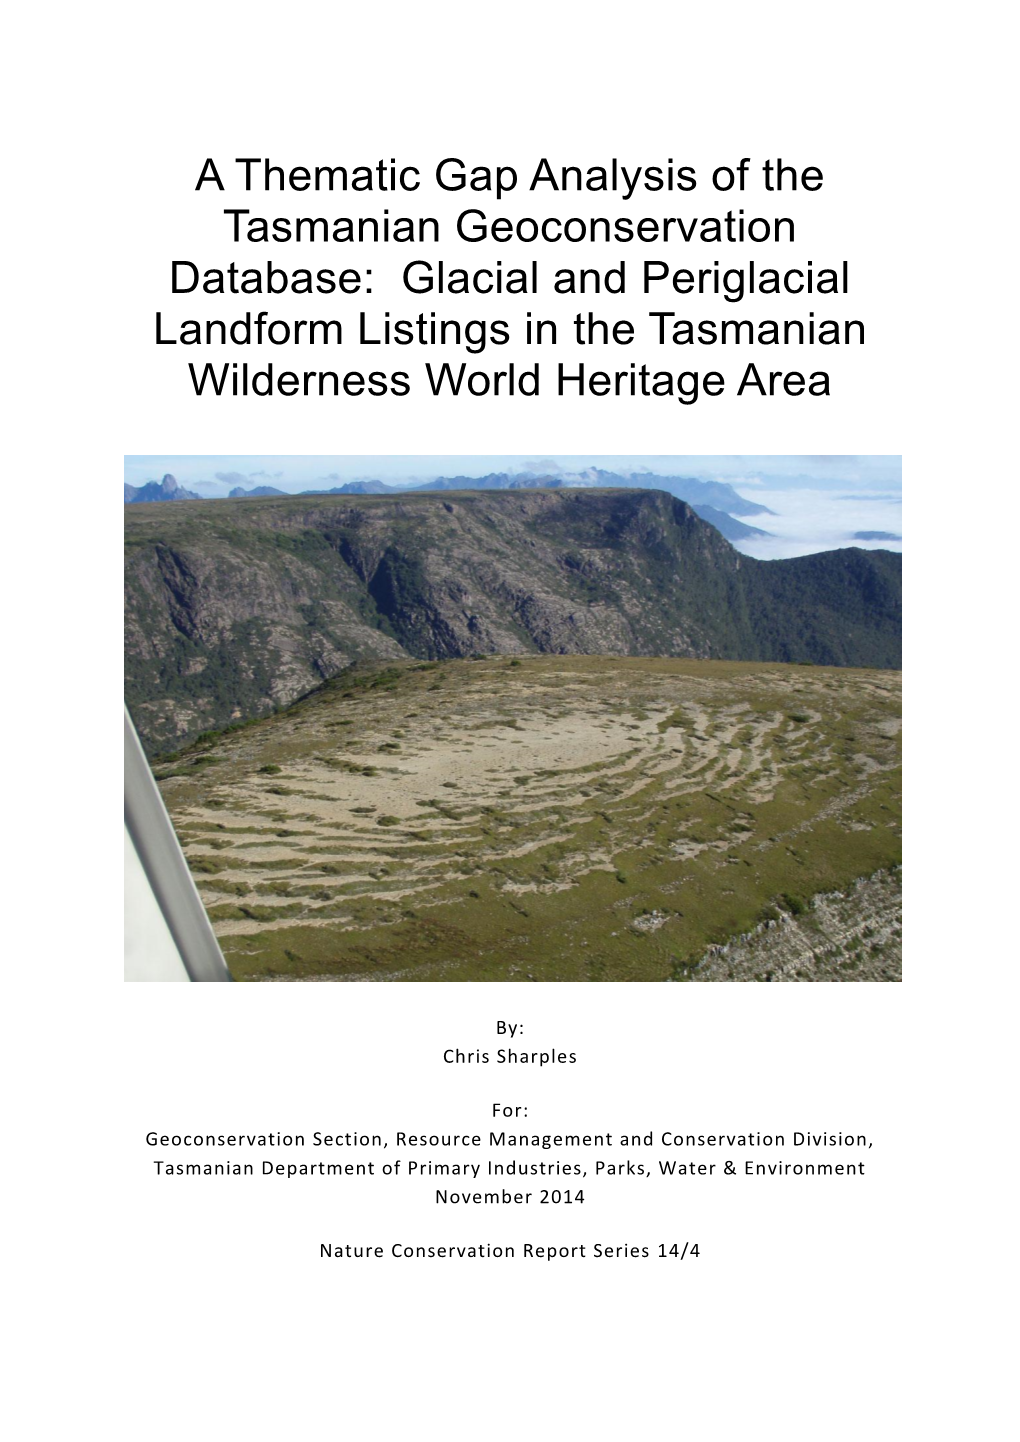 Glacial and Periglacial Landform Listings in the Tasmanian Wilderness World Heritage Area